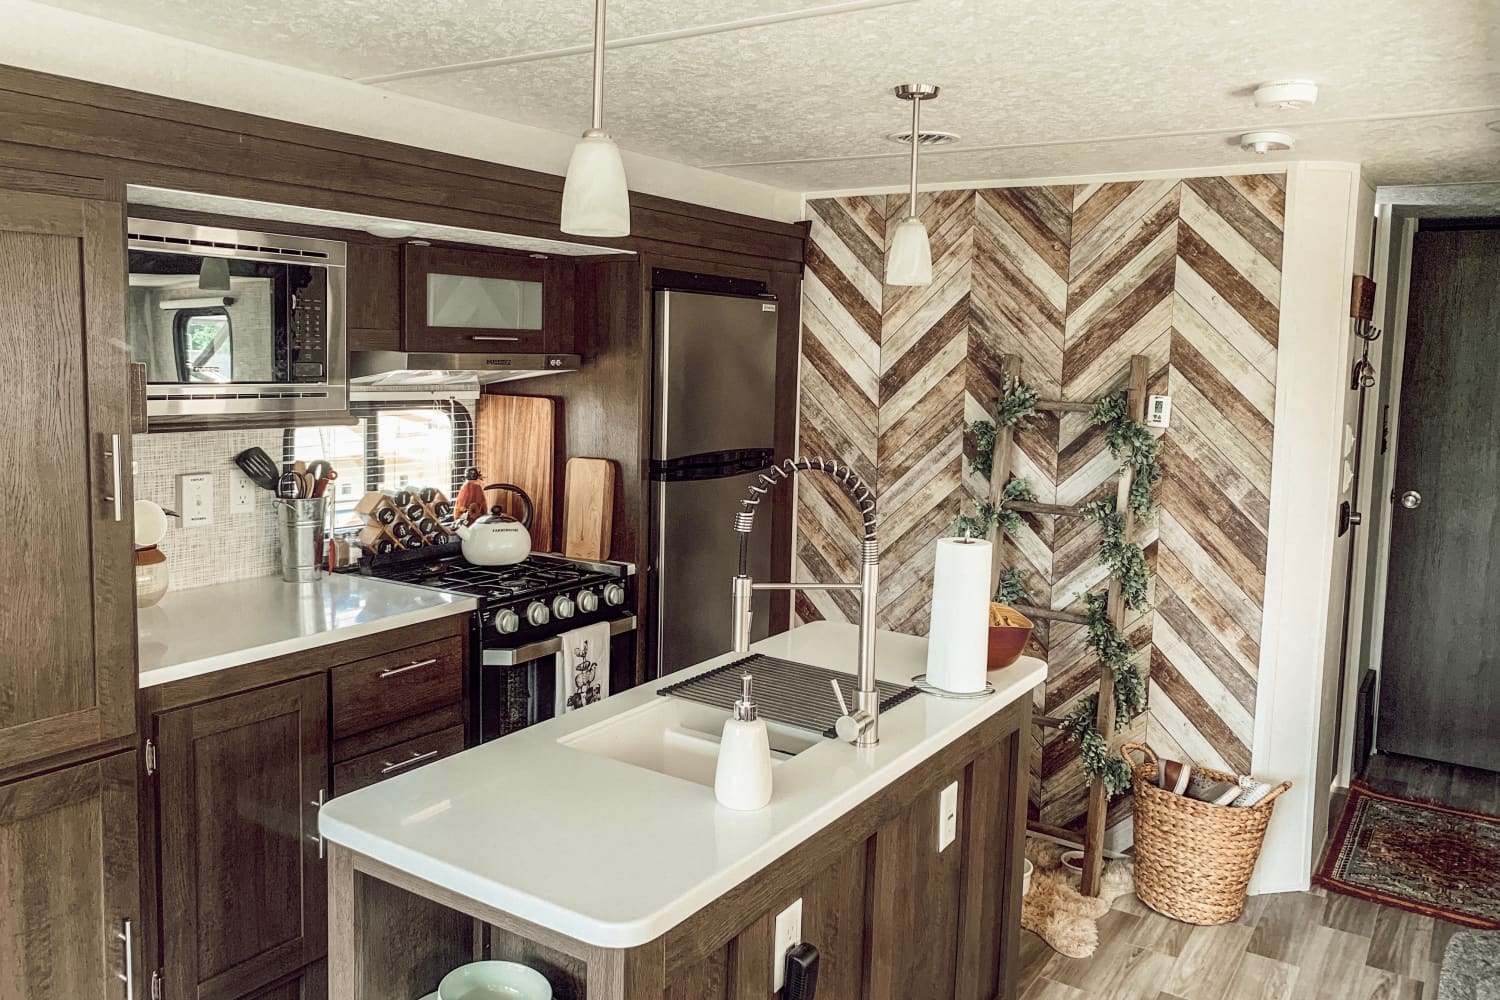 Country-Style Camper Bedroom Ideas to Decorate Your Cozy RV